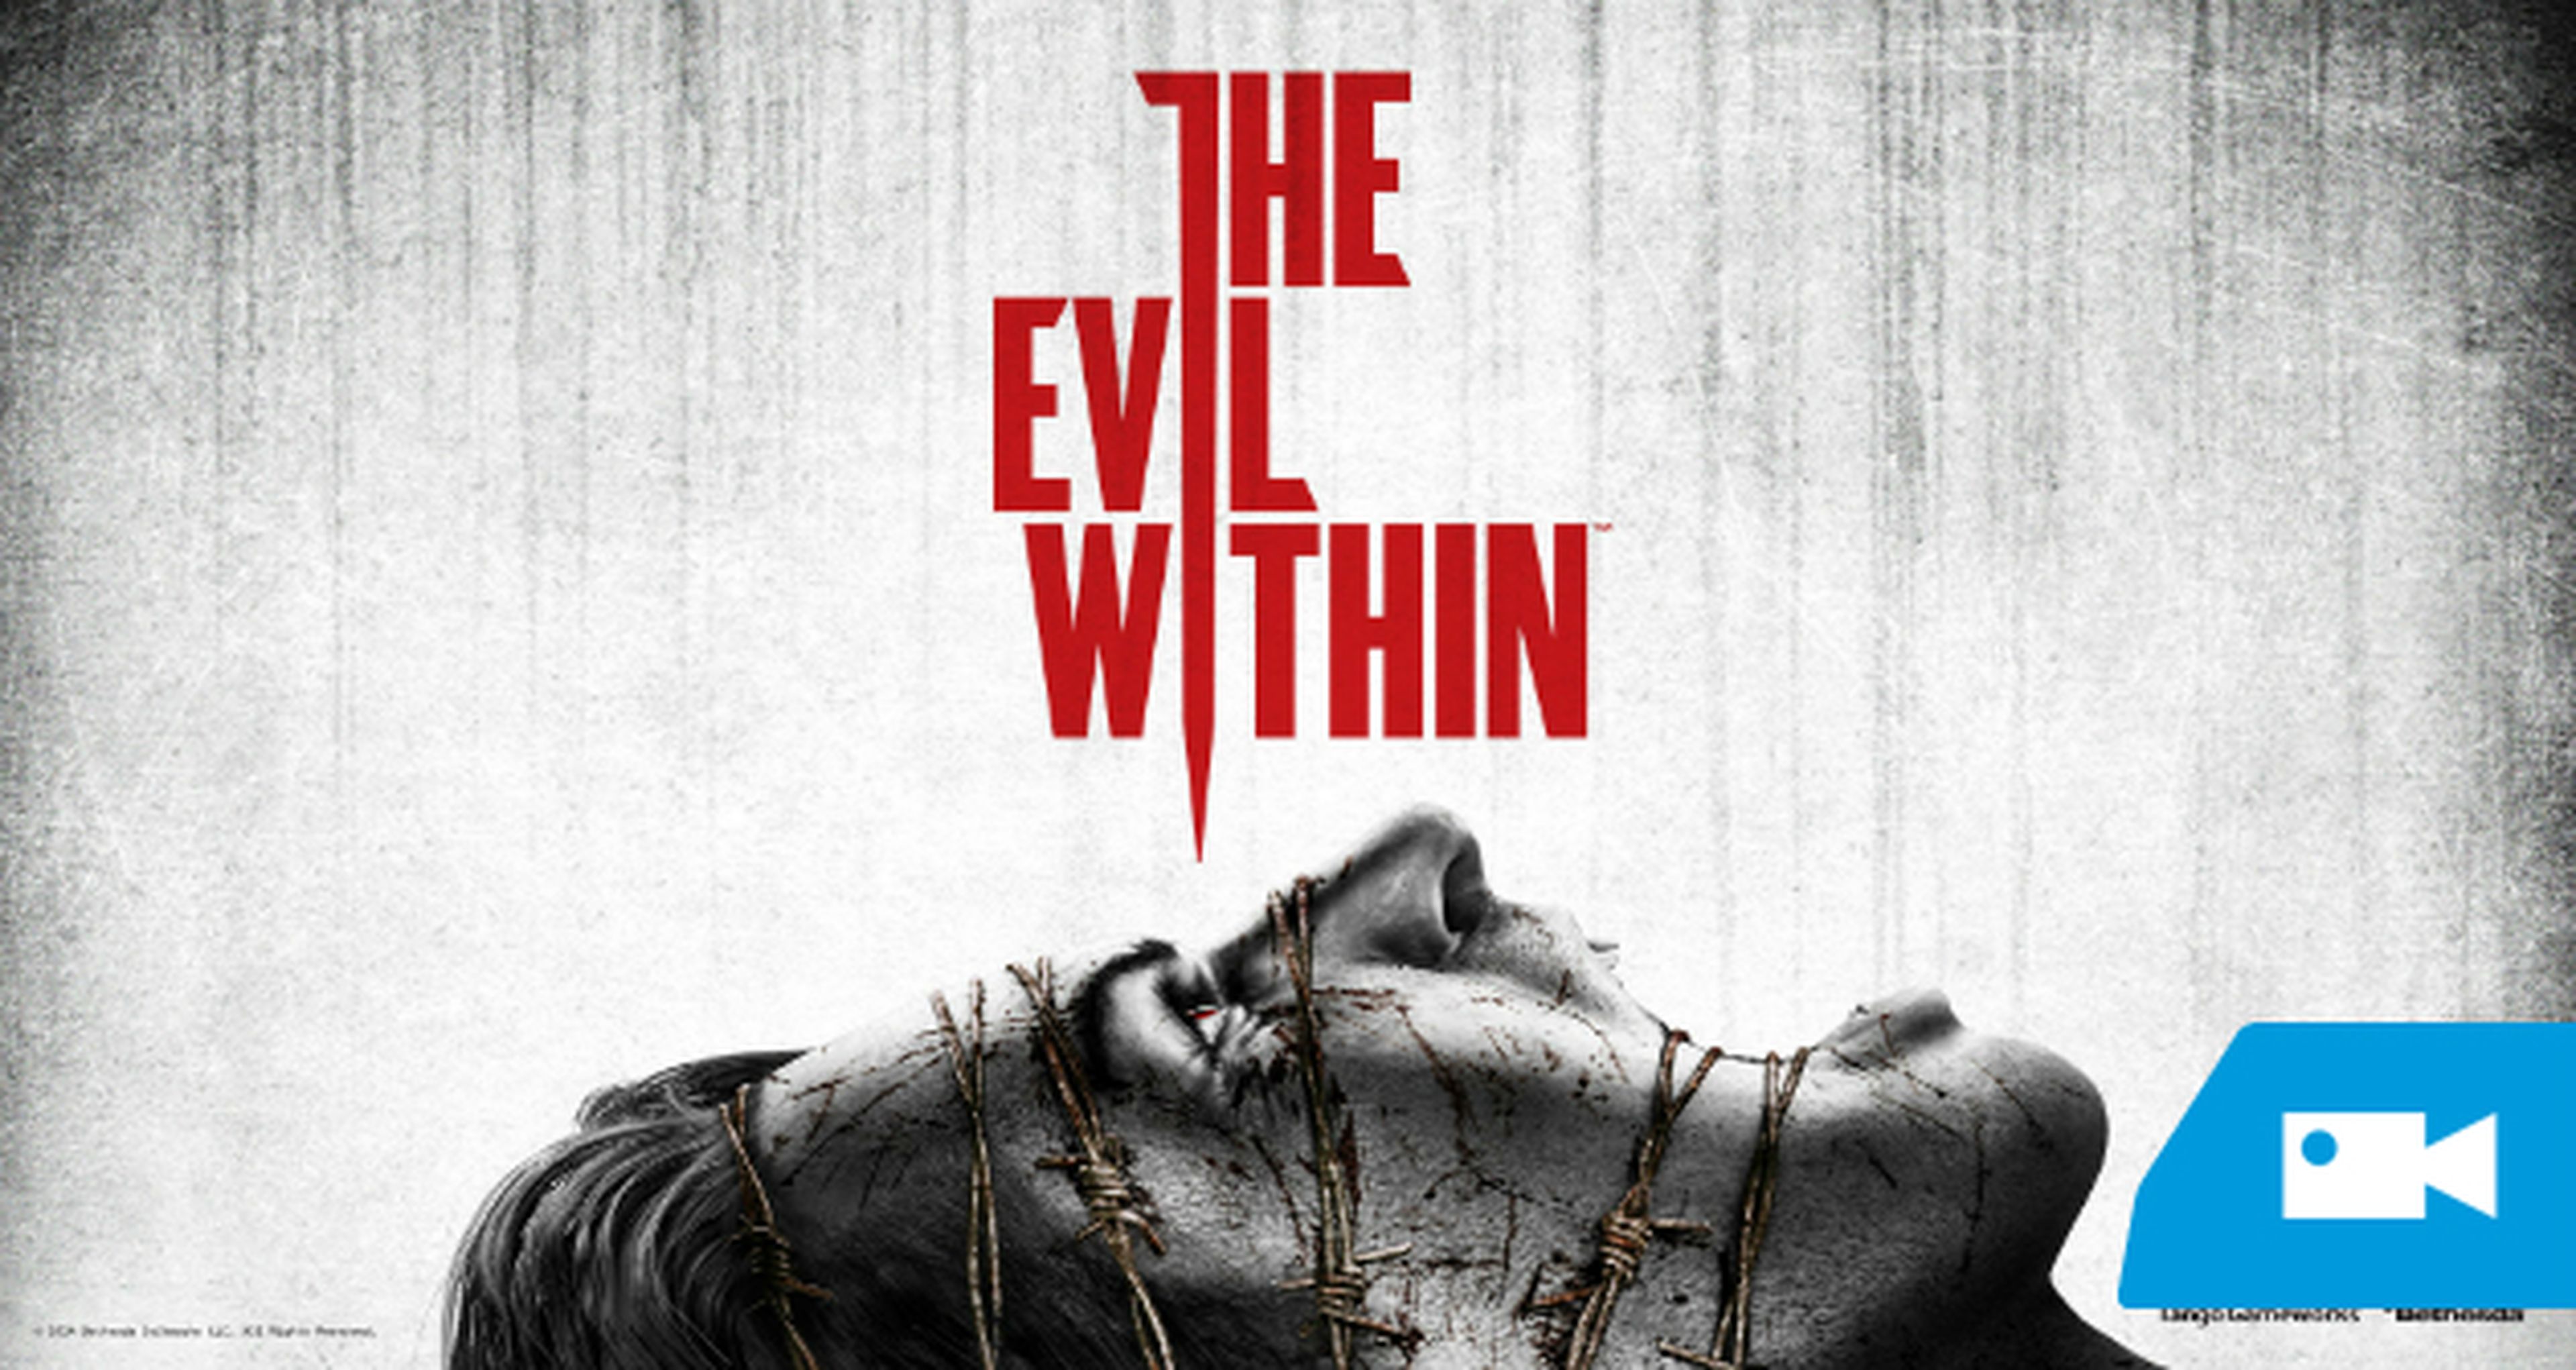 Gameplay extendido de The Evil Within